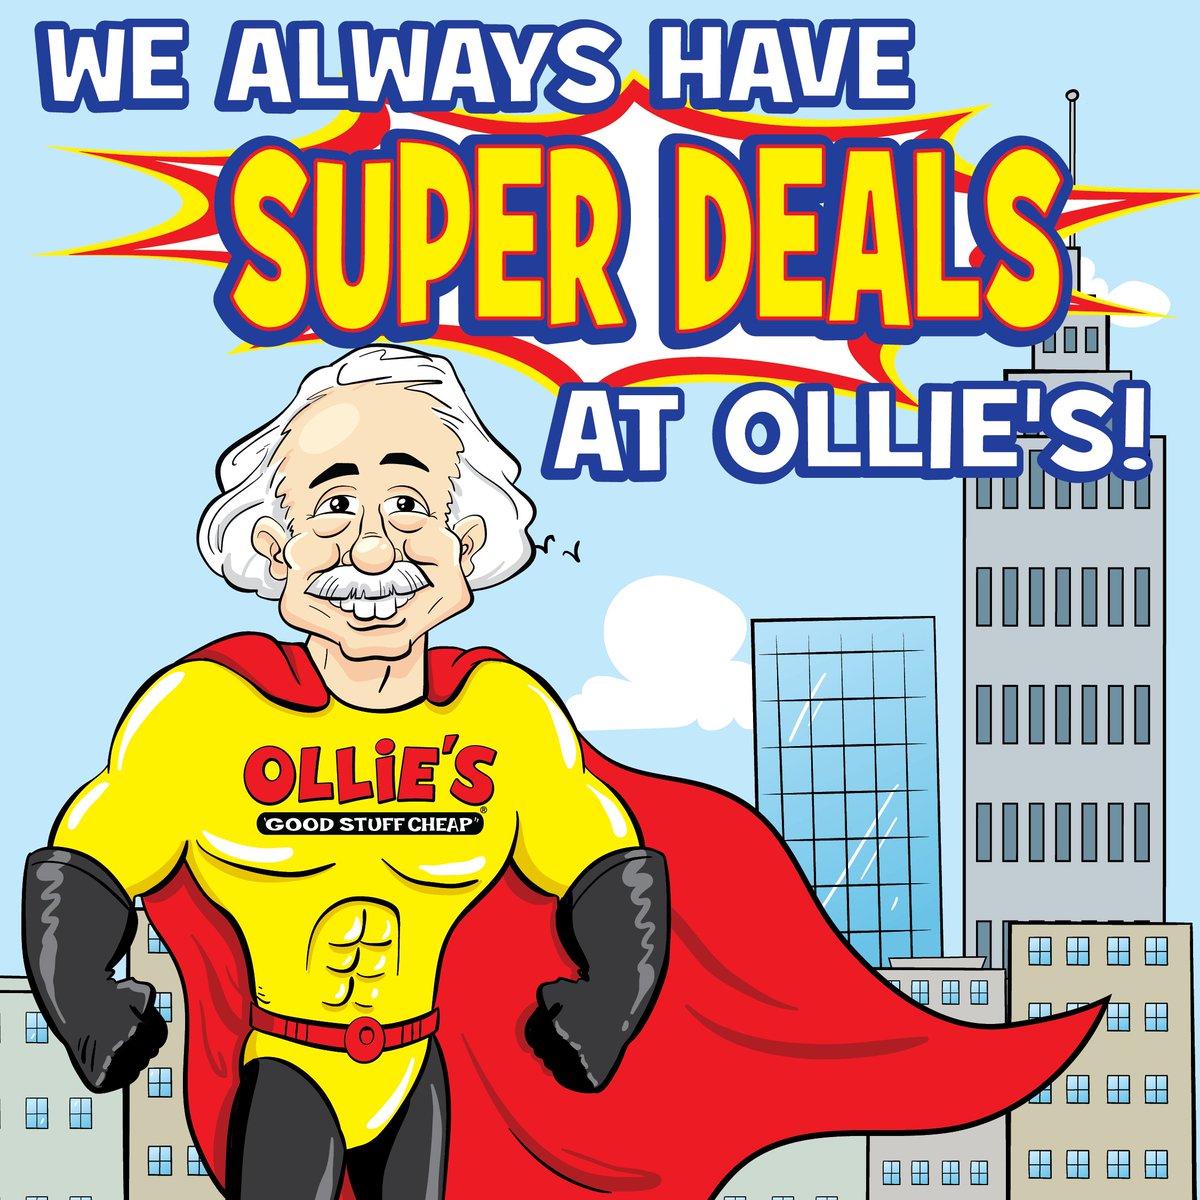 It's a Bird 🦅 it's a Plane ✈ it's...Good Stuff Cheap! Ollie's saves the day--and your budget--with HEROIC deals on Brand Name Goods up to 70% off the Fancy Store prices! Fly in for SUPER Savings! 🦸‍♂️🦸‍♀️ #goodstuffcheap #SundayFunday #NationalSuperHeroDay